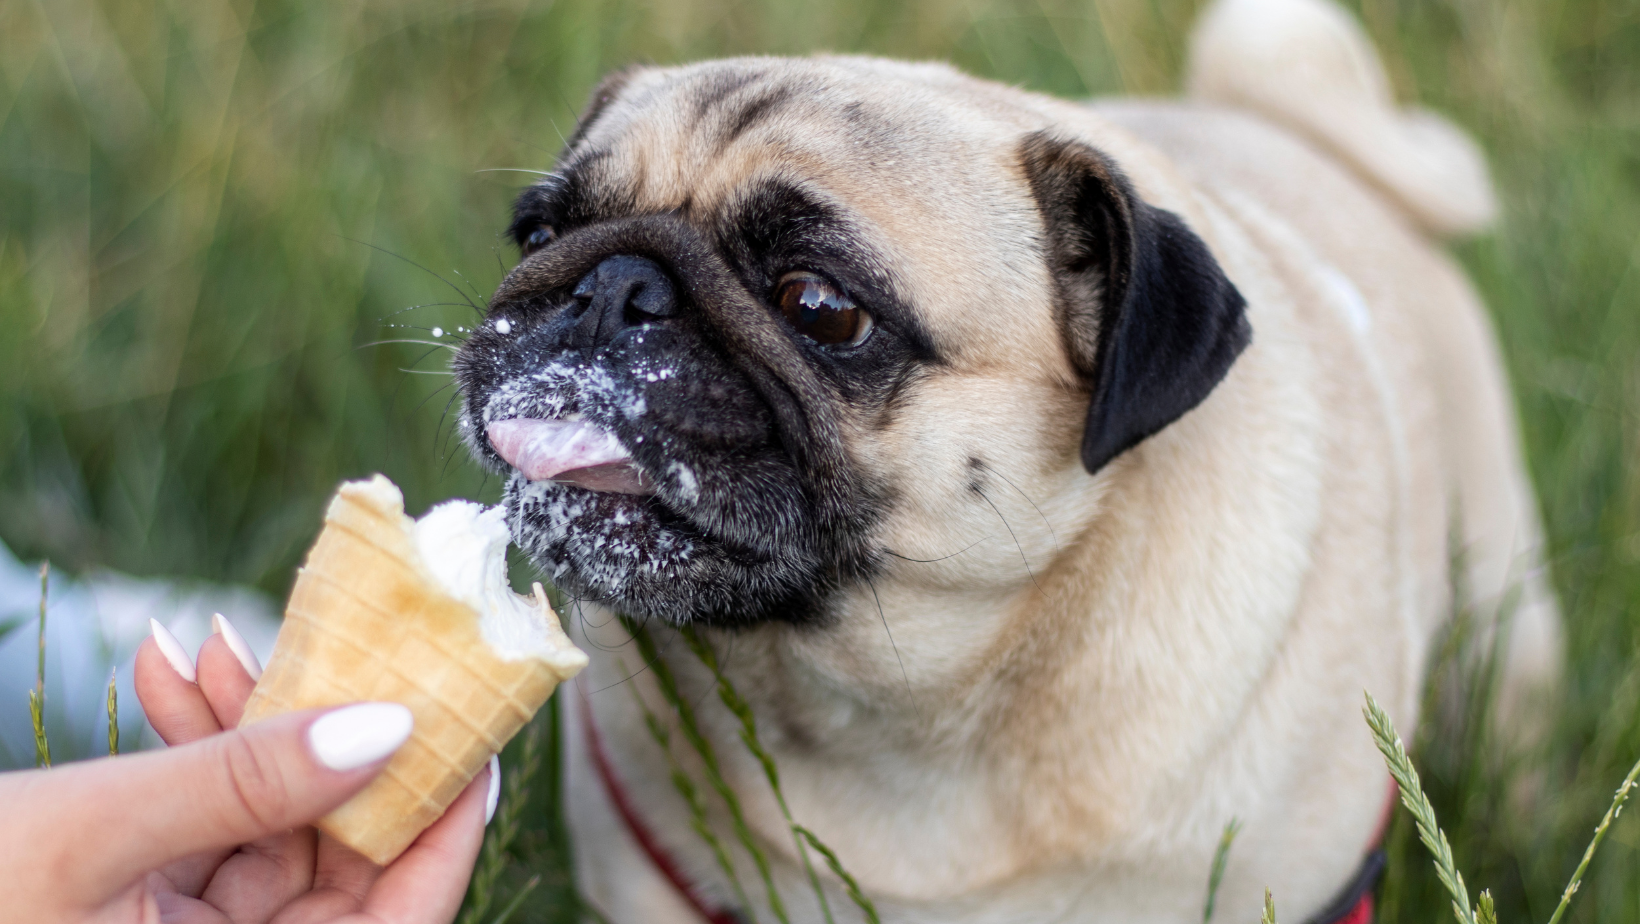 Should I Stop Giving My Pet Dog Sugar Treats Due to Weight Gain?